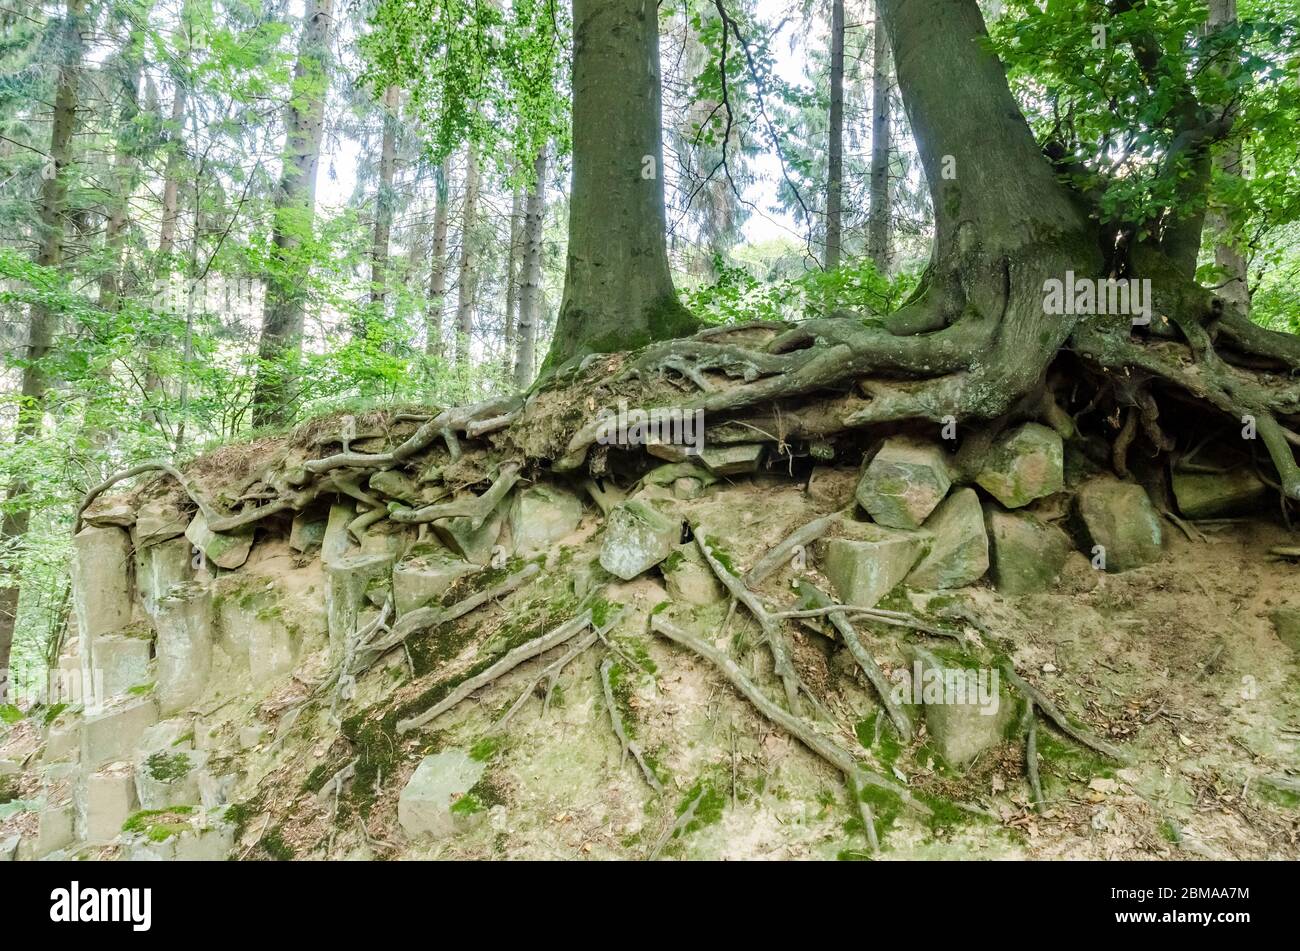 Basaltkrater Blauer Stein, basalt crater rock formations in a forest in the  Westerwald woodlands in Rhineland-Palatinate, Germany, Western Europe Stock Photo